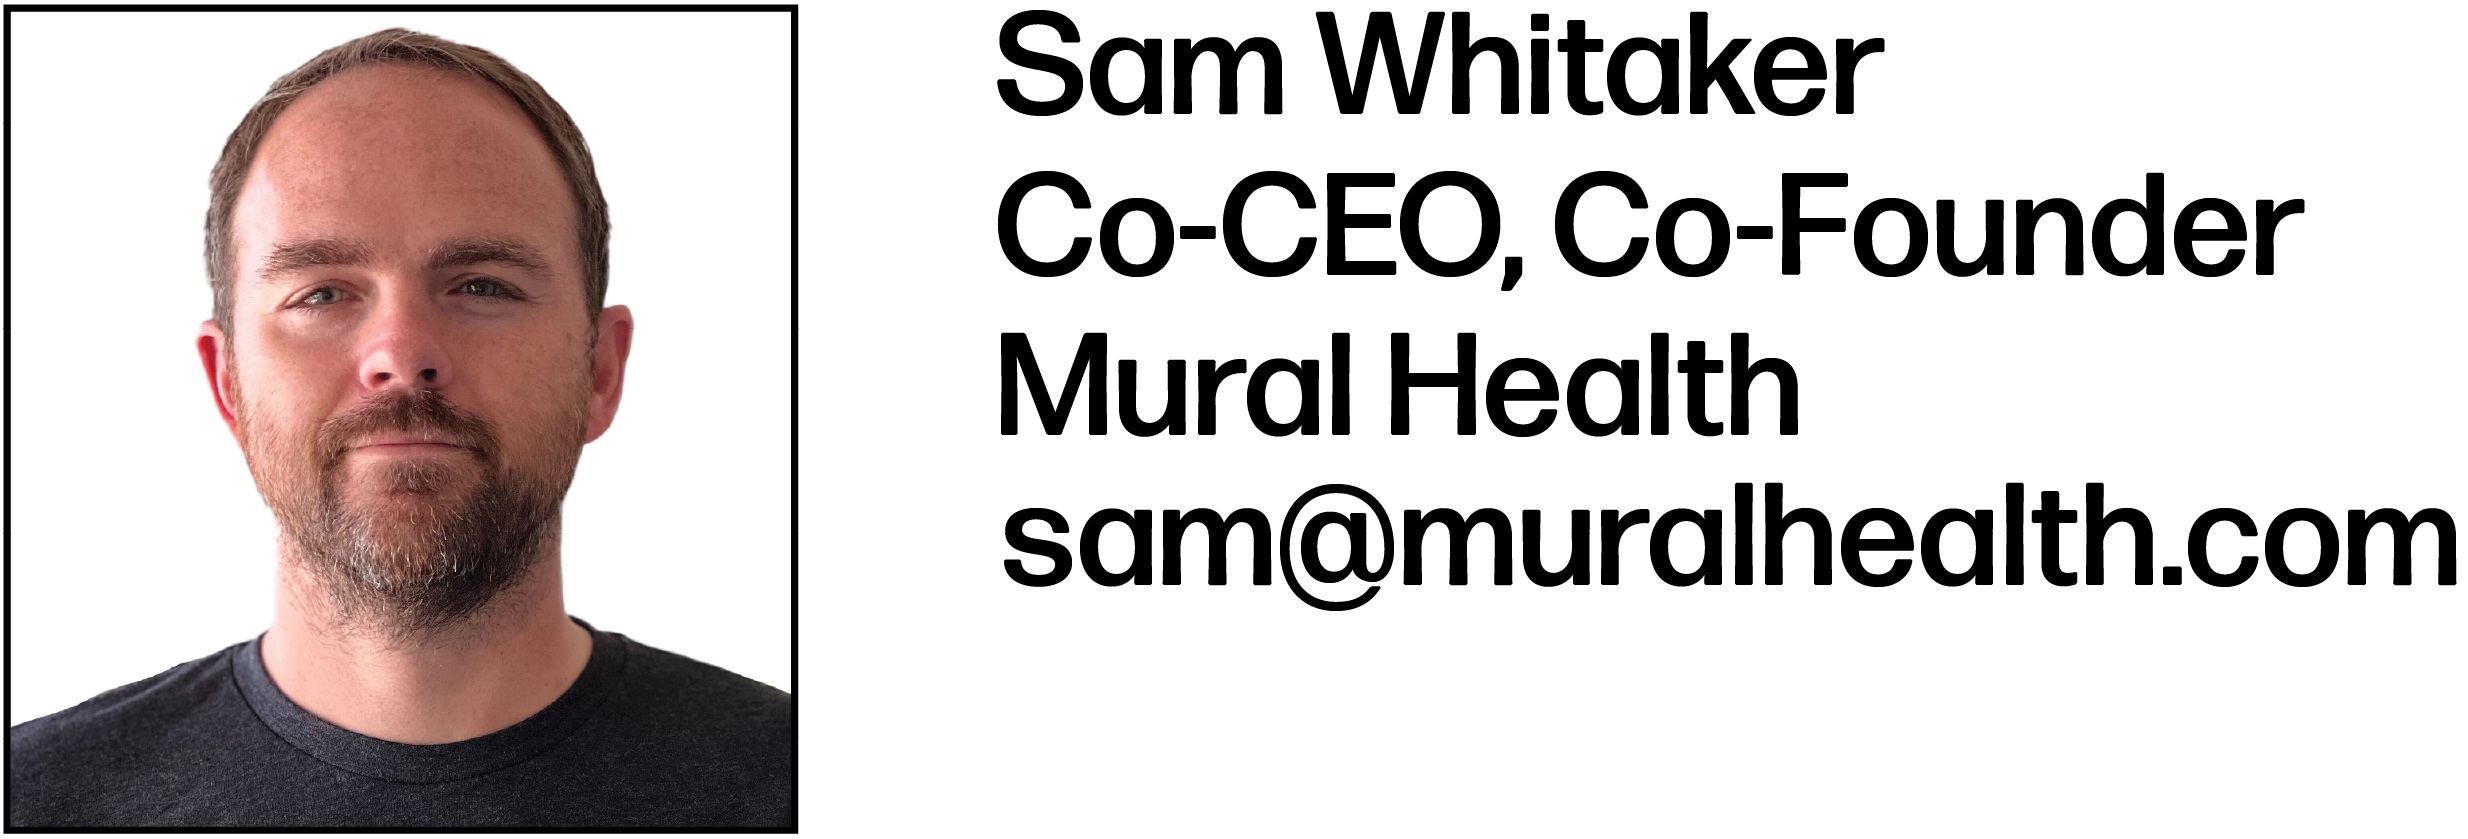 Headshot of Sam Whitaker, who is listed as Co-CEO, Co-Founder of Mural Health. His email is sam@muralhealth.com.